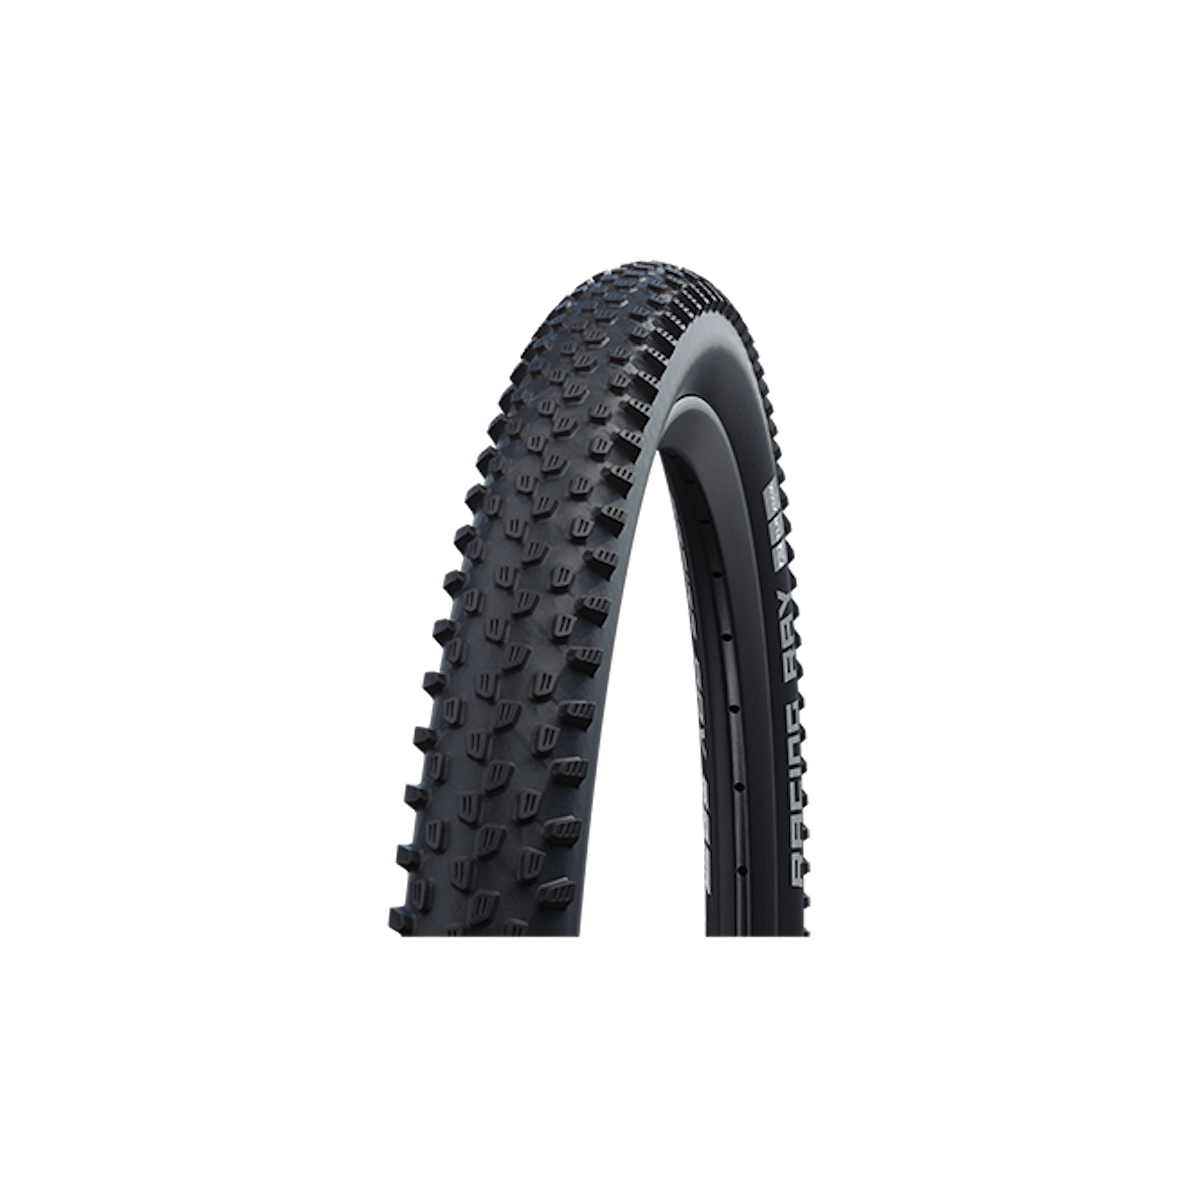 SCHWALBE RACING RAY 29 X 2.25 tubeless tyre